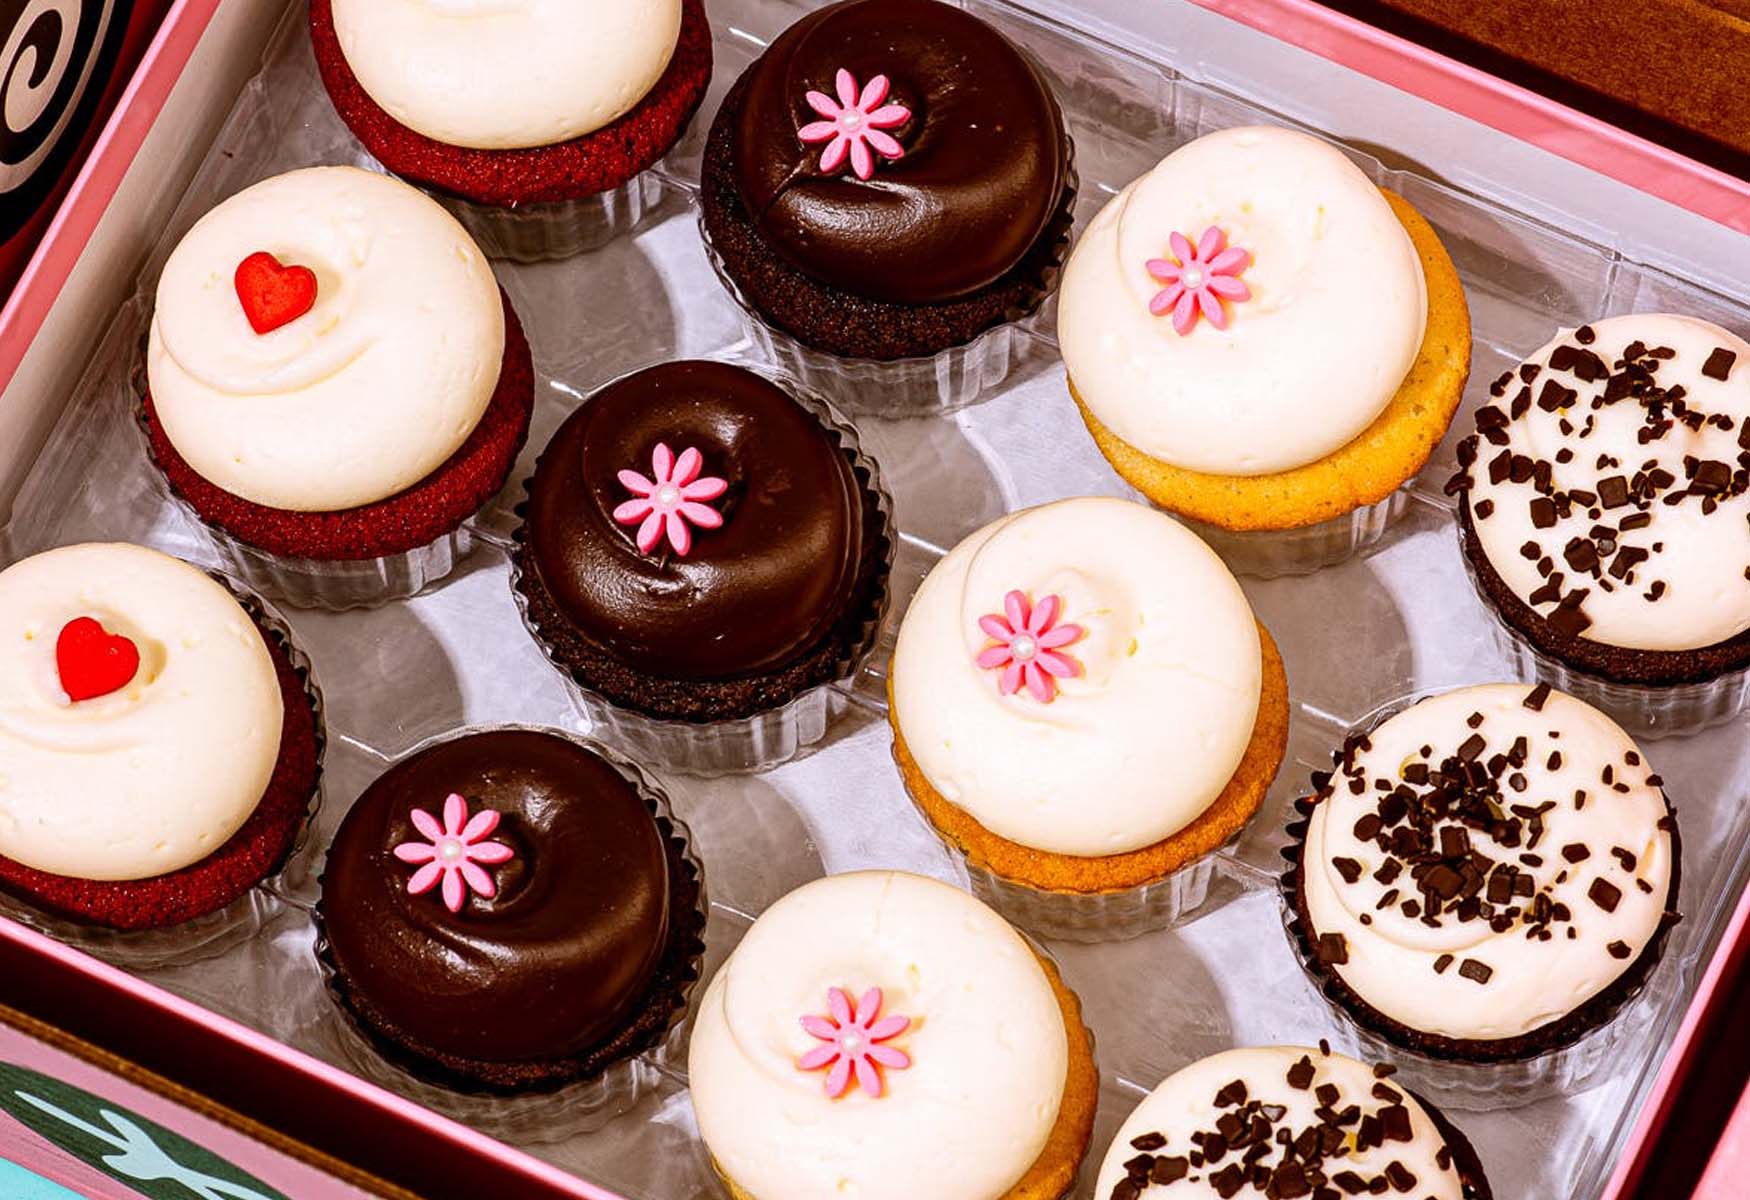 18-georgetown-cupcakes-nutrition-facts